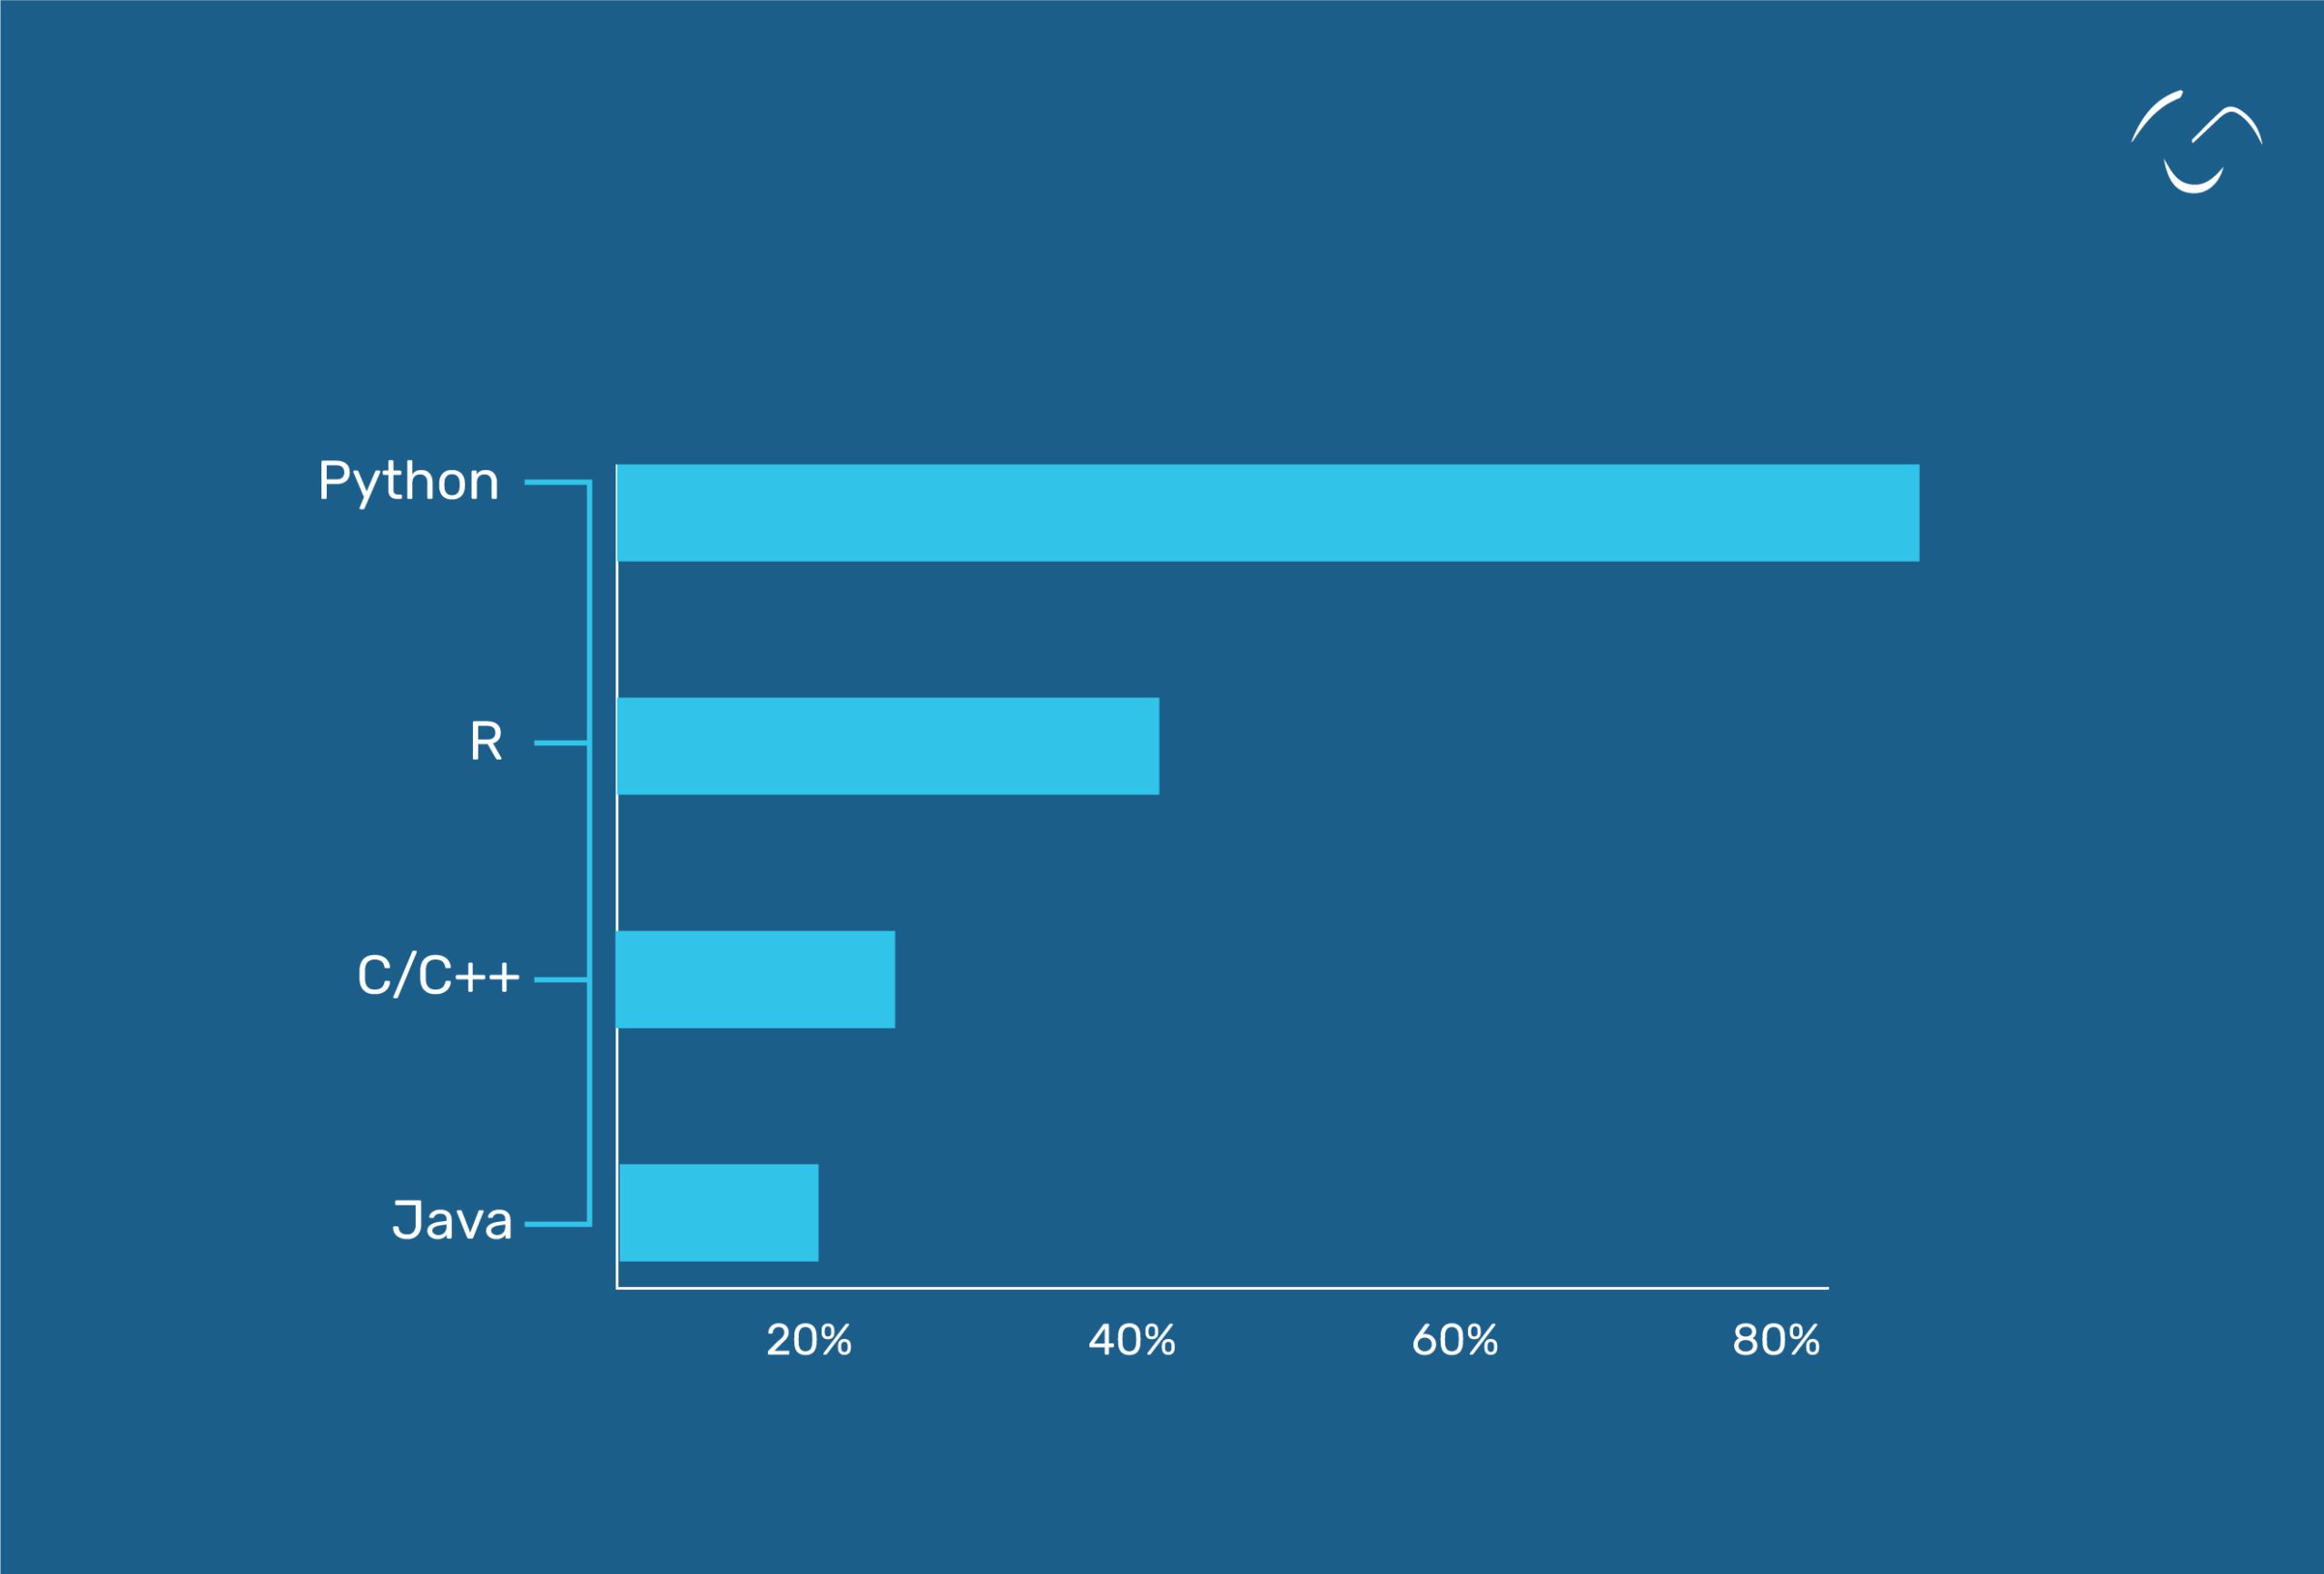 python libraries popularity